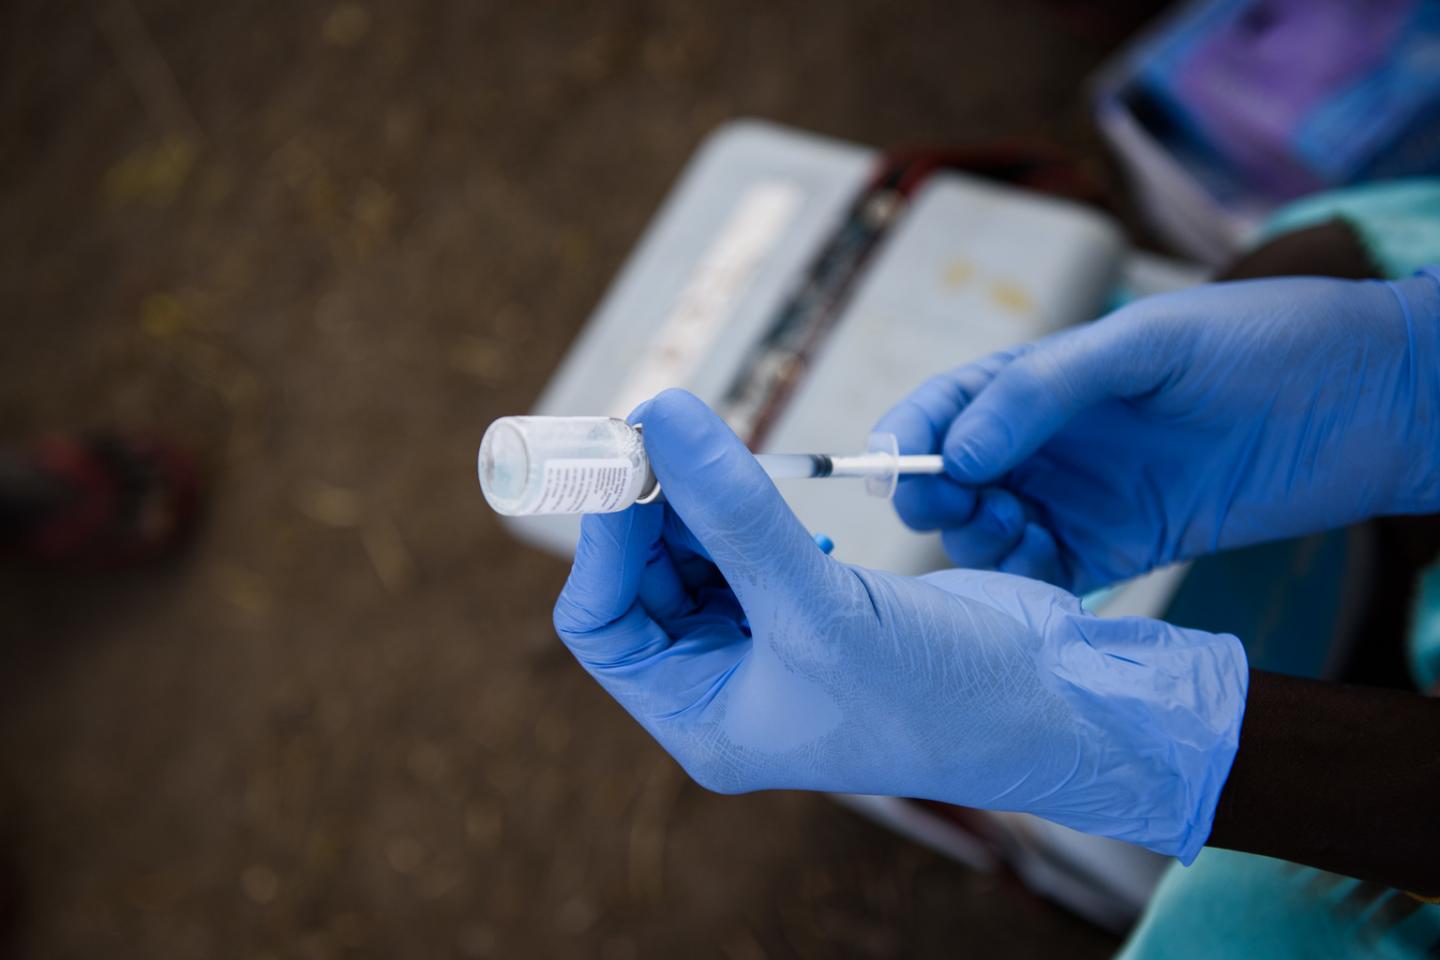 UNICEF will prepare more than 500 million syringes by the end of the year to prepare for Coronavirus vaccination